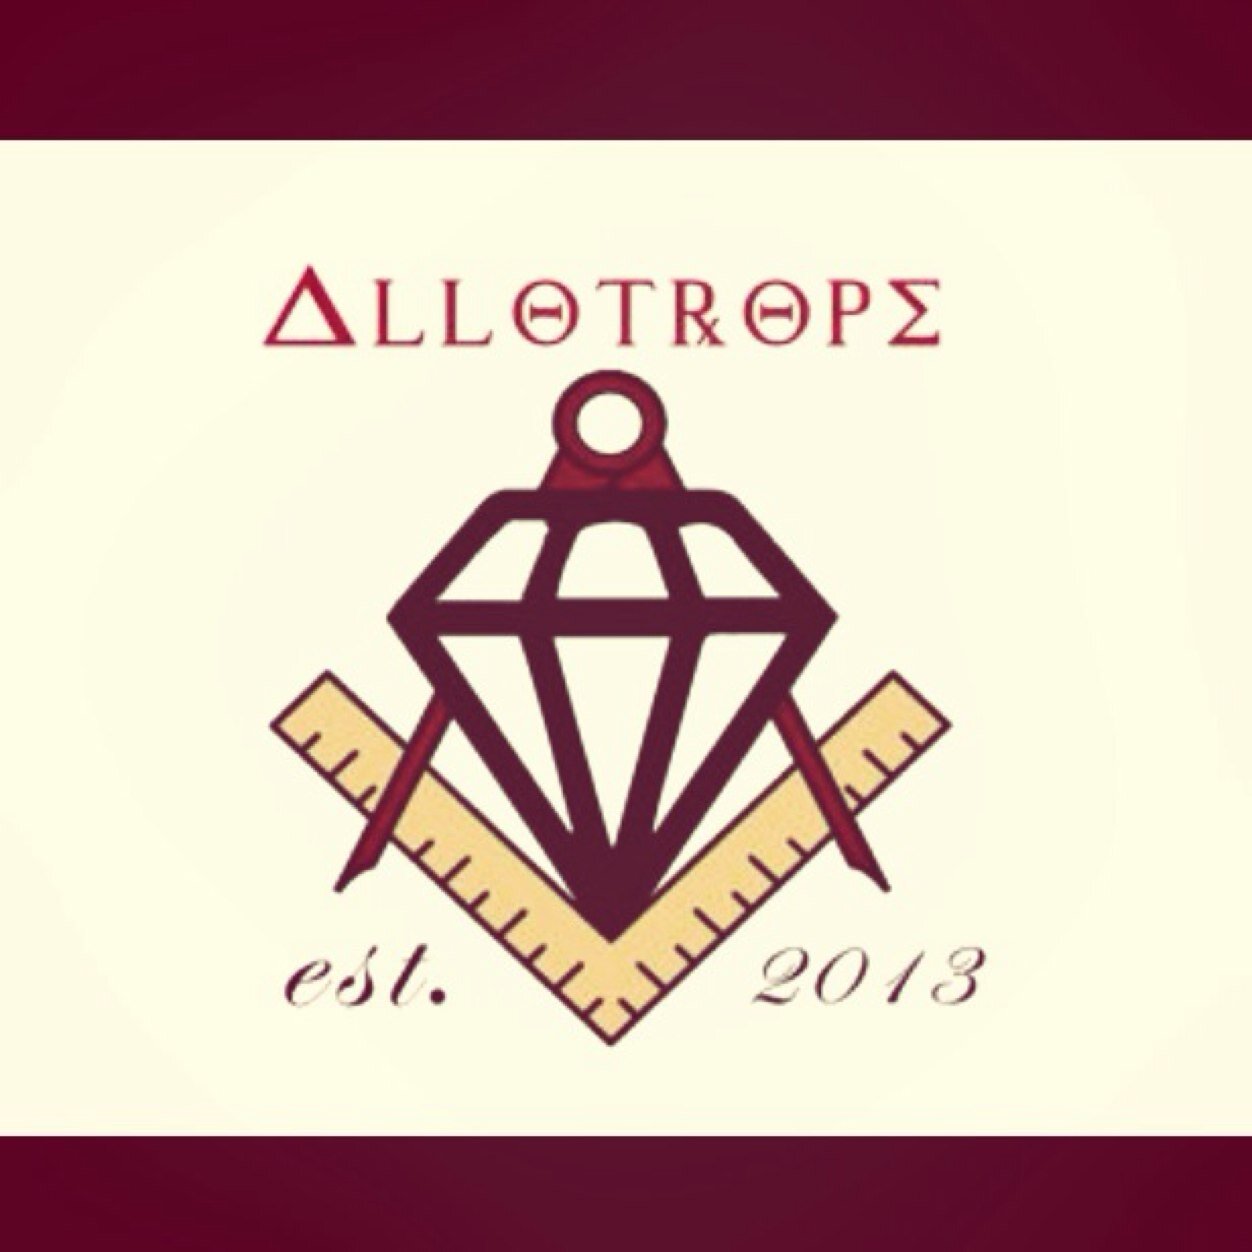 'Helping Creativity In The Community' through; Dance, Music Tech & Media. Welcome to the revolution #AlloTROOPS AllotropeCompanyLTD@gmail.com